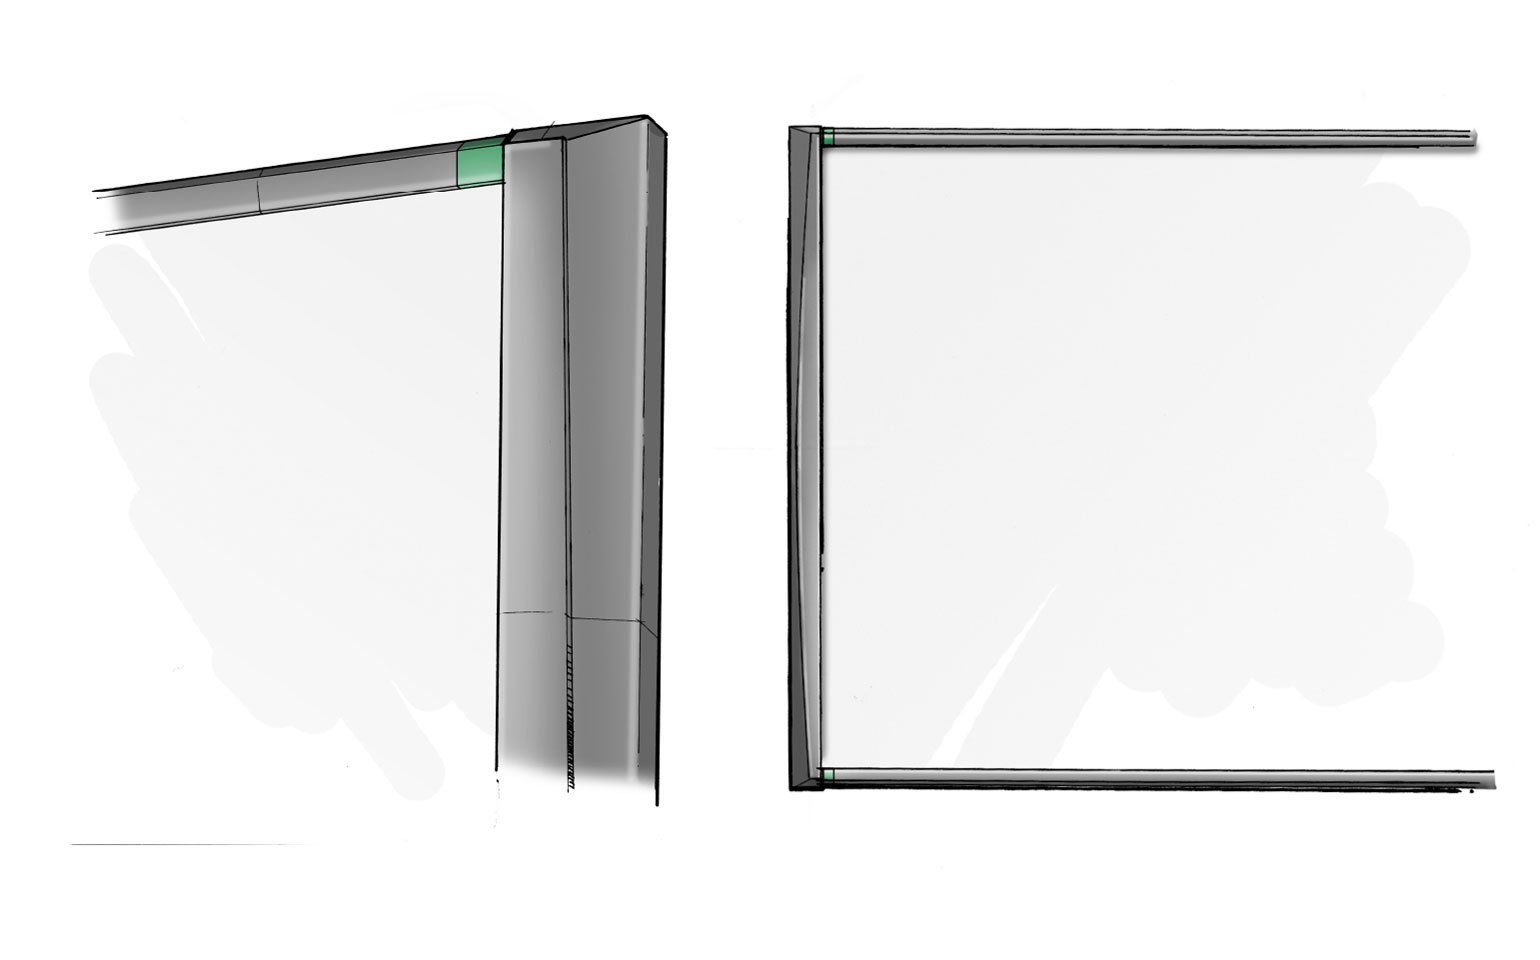 sketches of corners of whiteboards